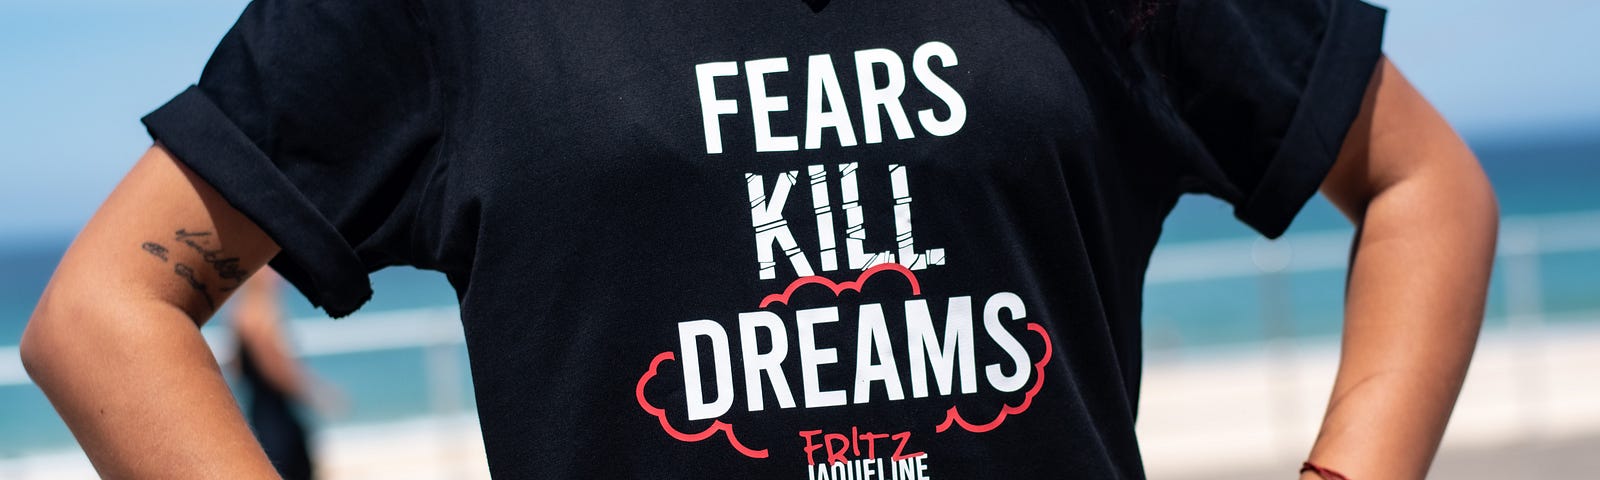 A woman wearing a black t-shirt with the text “Fears kill dreams”